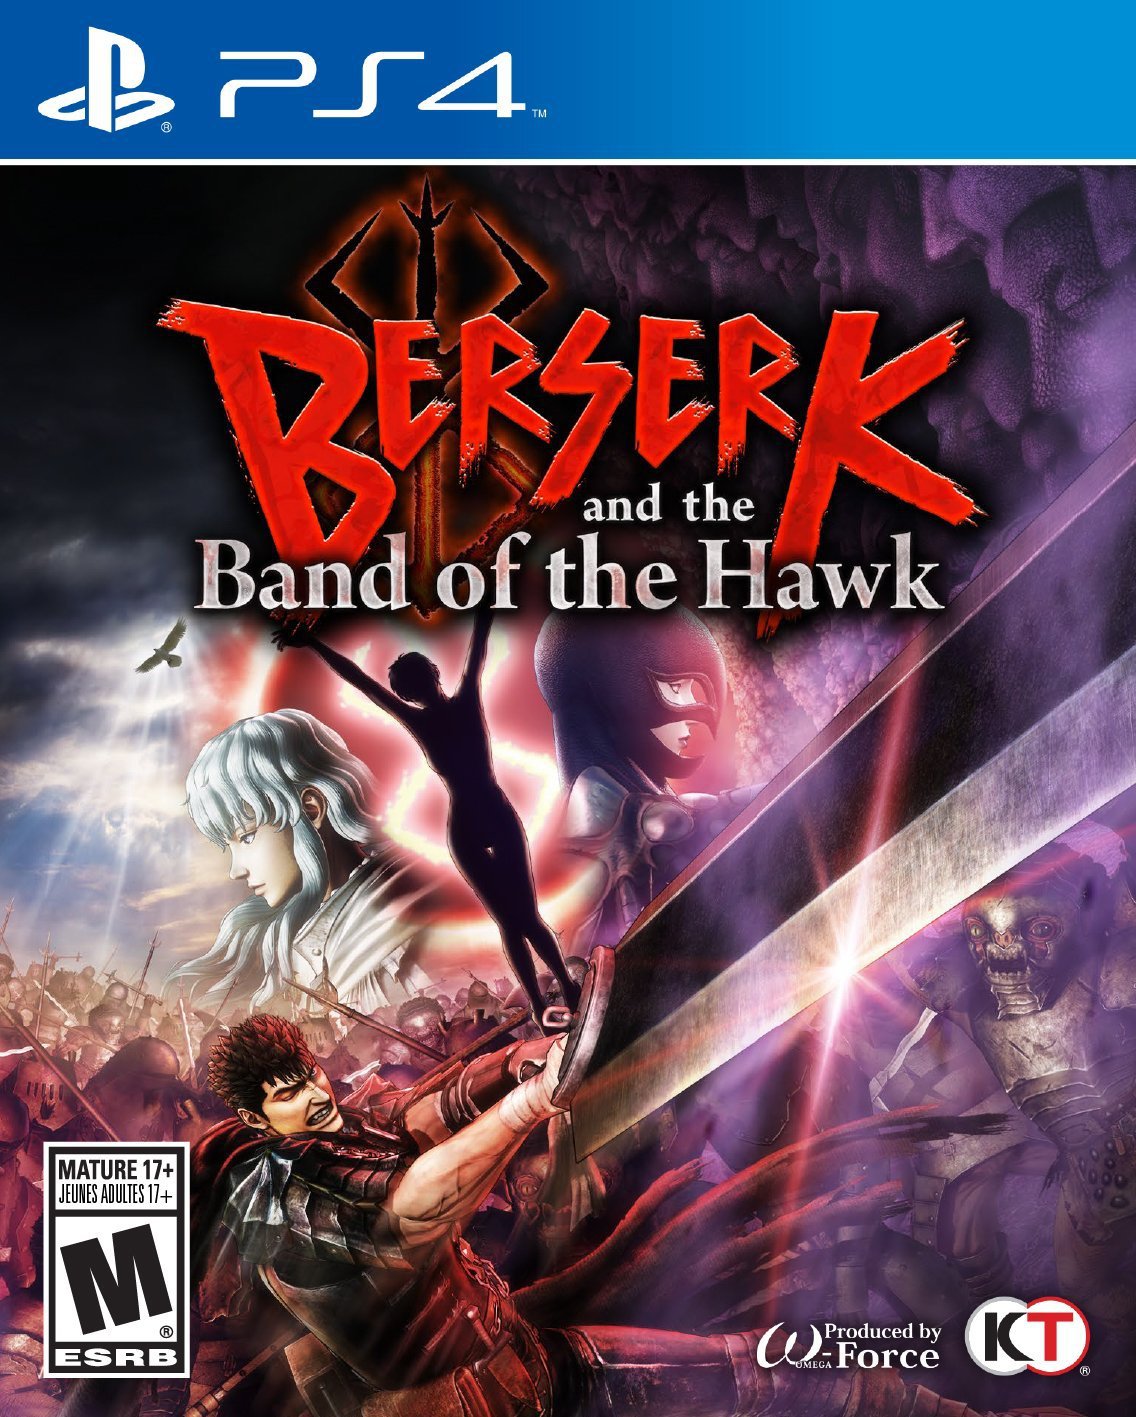 Berserk and Band of the Hawk